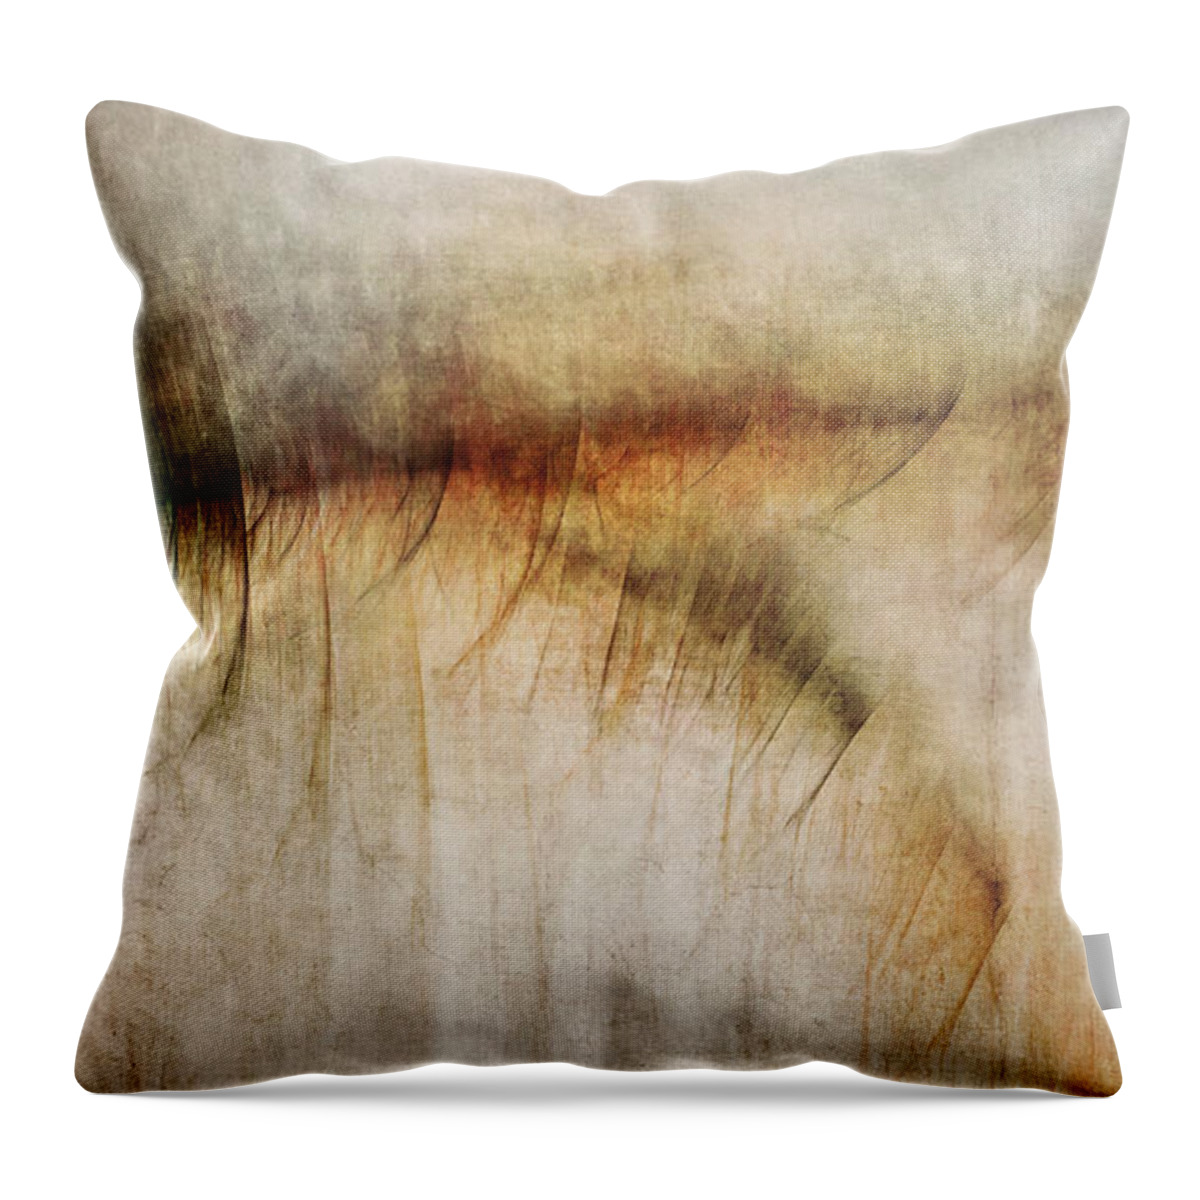 Fire Throw Pillow featuring the digital art Fire Walk With Me by Scott Norris